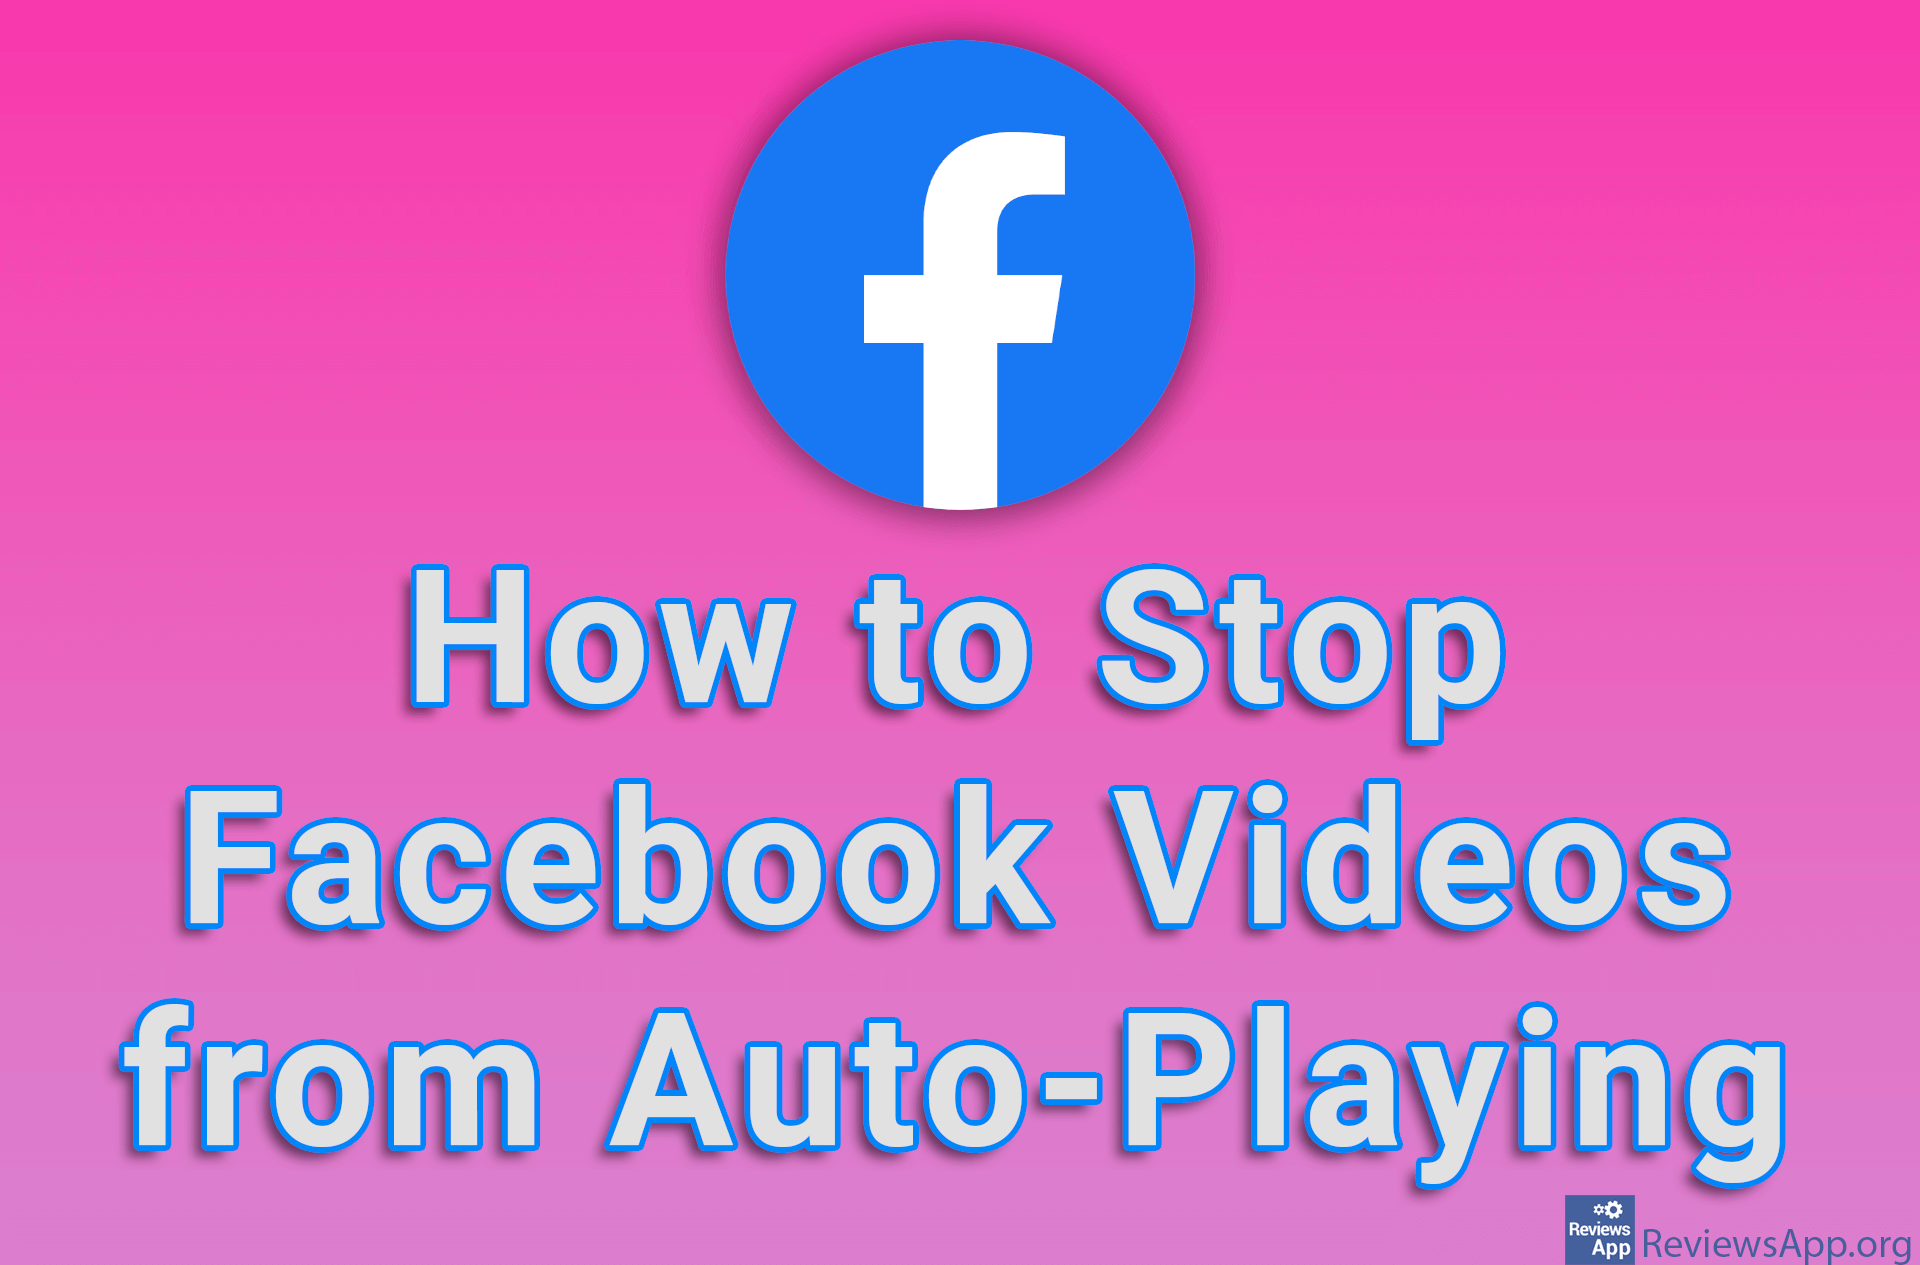 How to Stop Facebook Videos from Auto-Playing